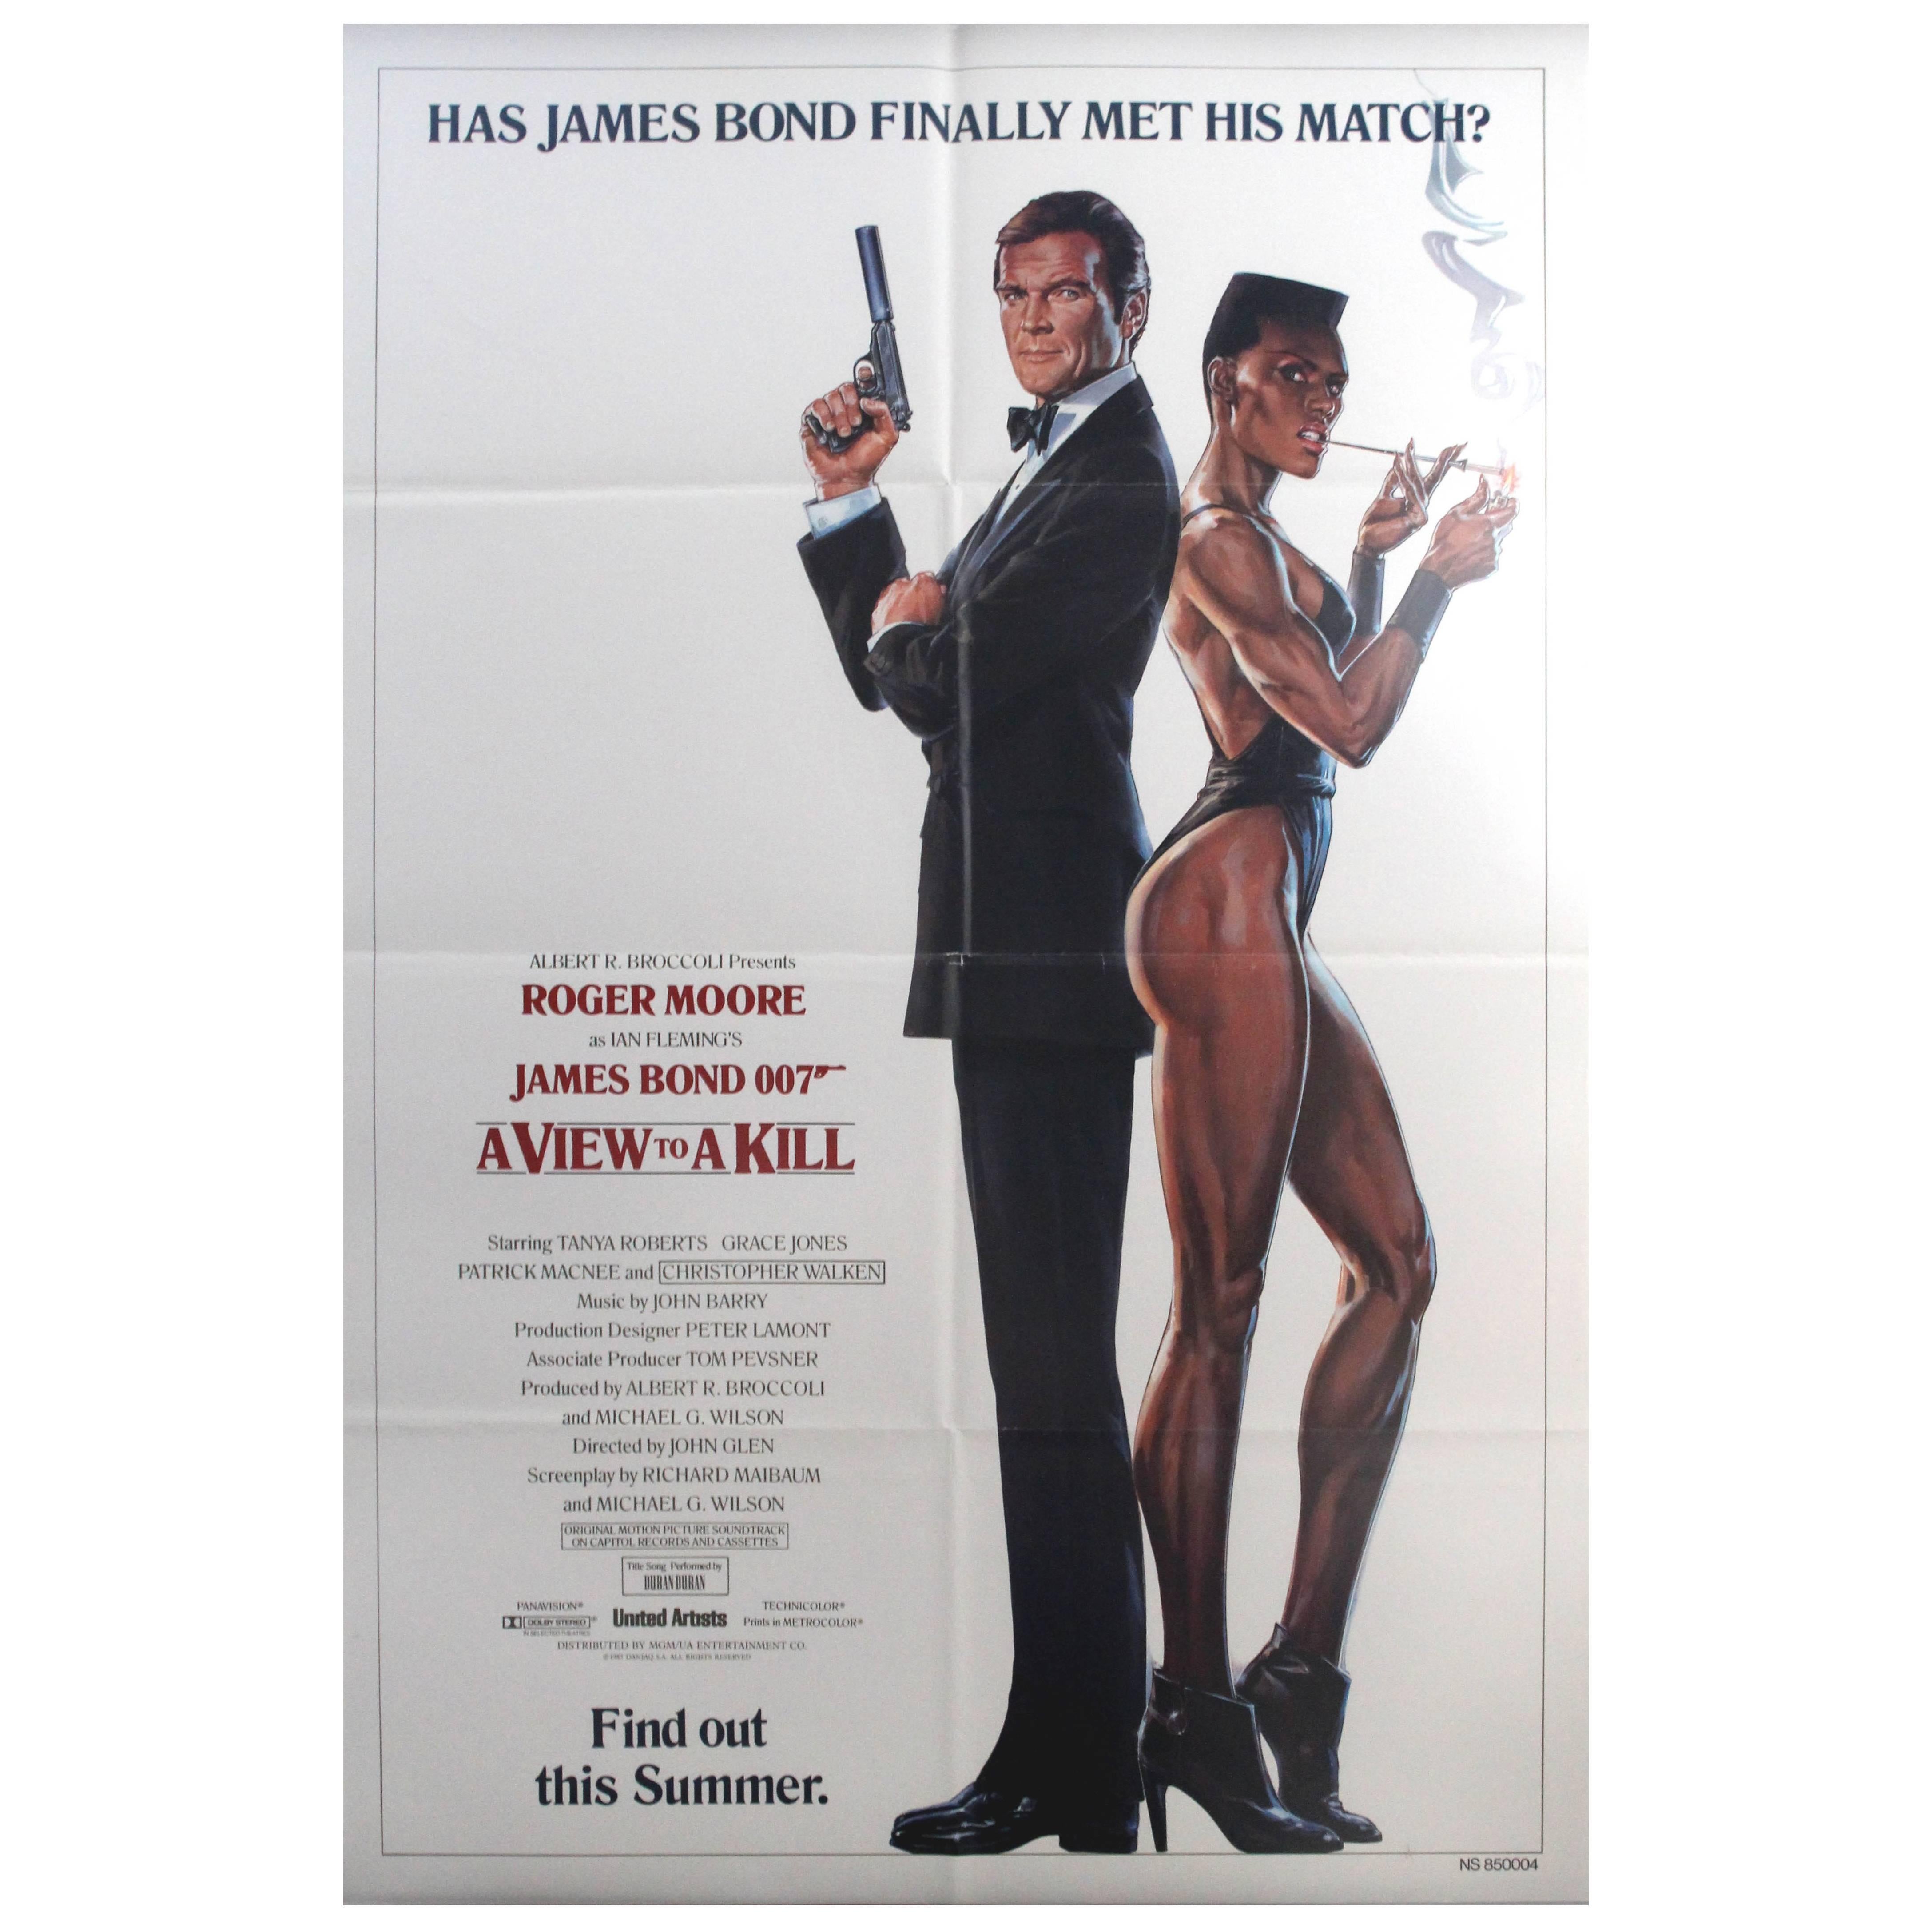 Original Vintage 007 James Bond Movie Poster "A View To A Kill - Roger Moore"